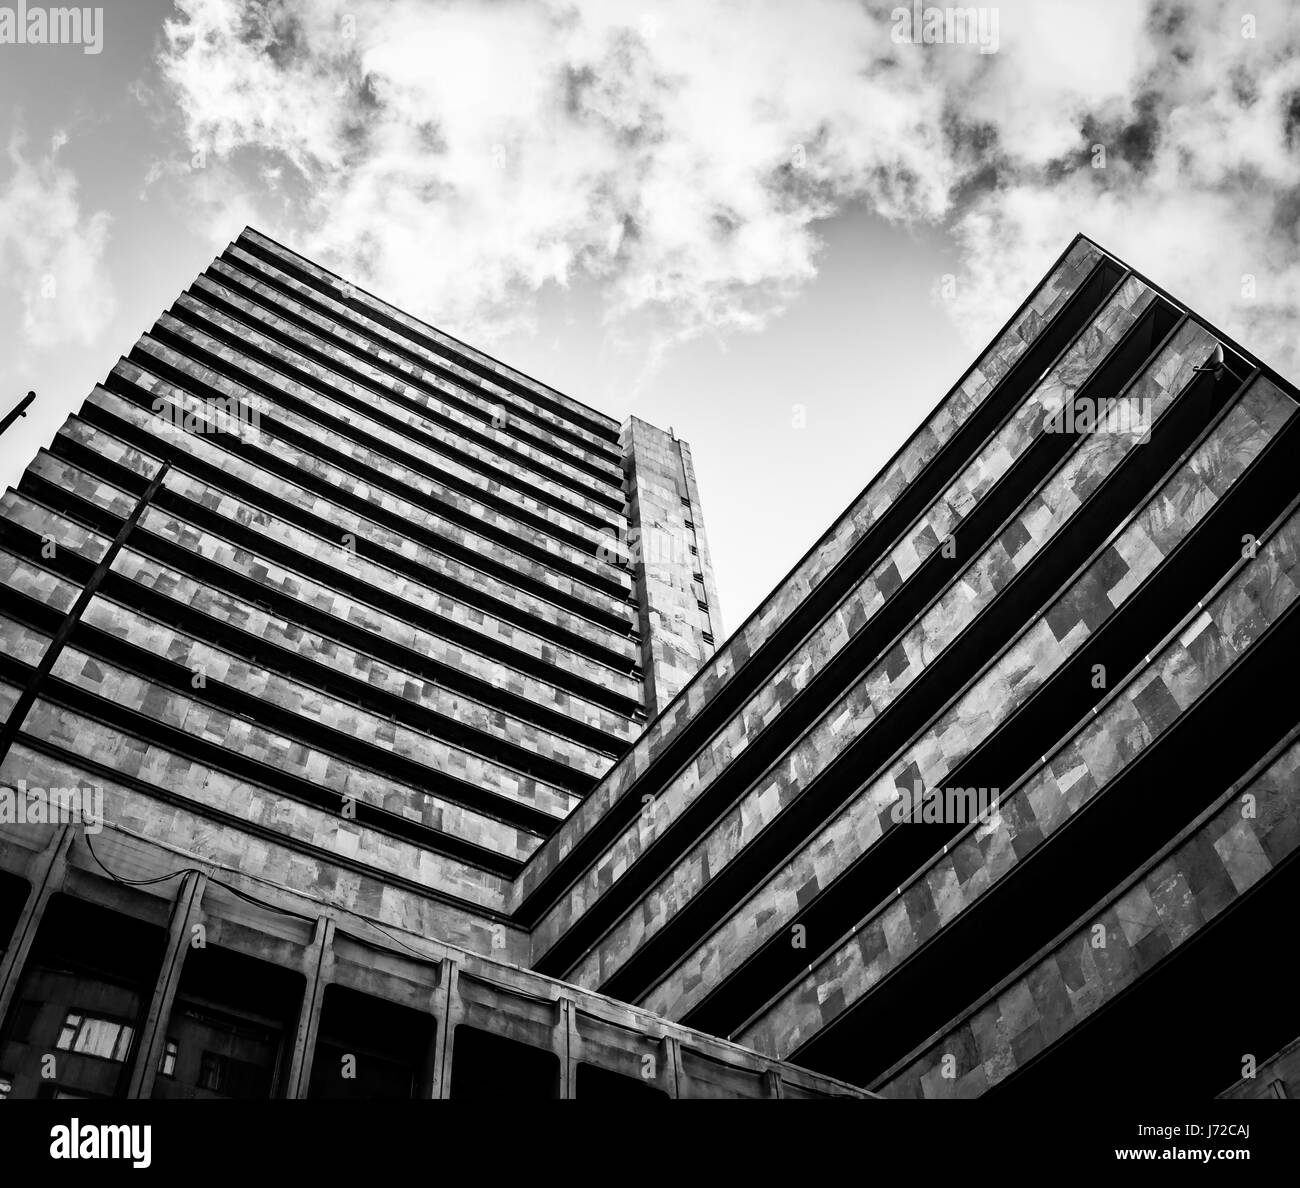 BOGOTA, COLOMBIA - Aug, 2016: Black and White building in Downtown Bogota - Bogota, Colombia Stock Photo